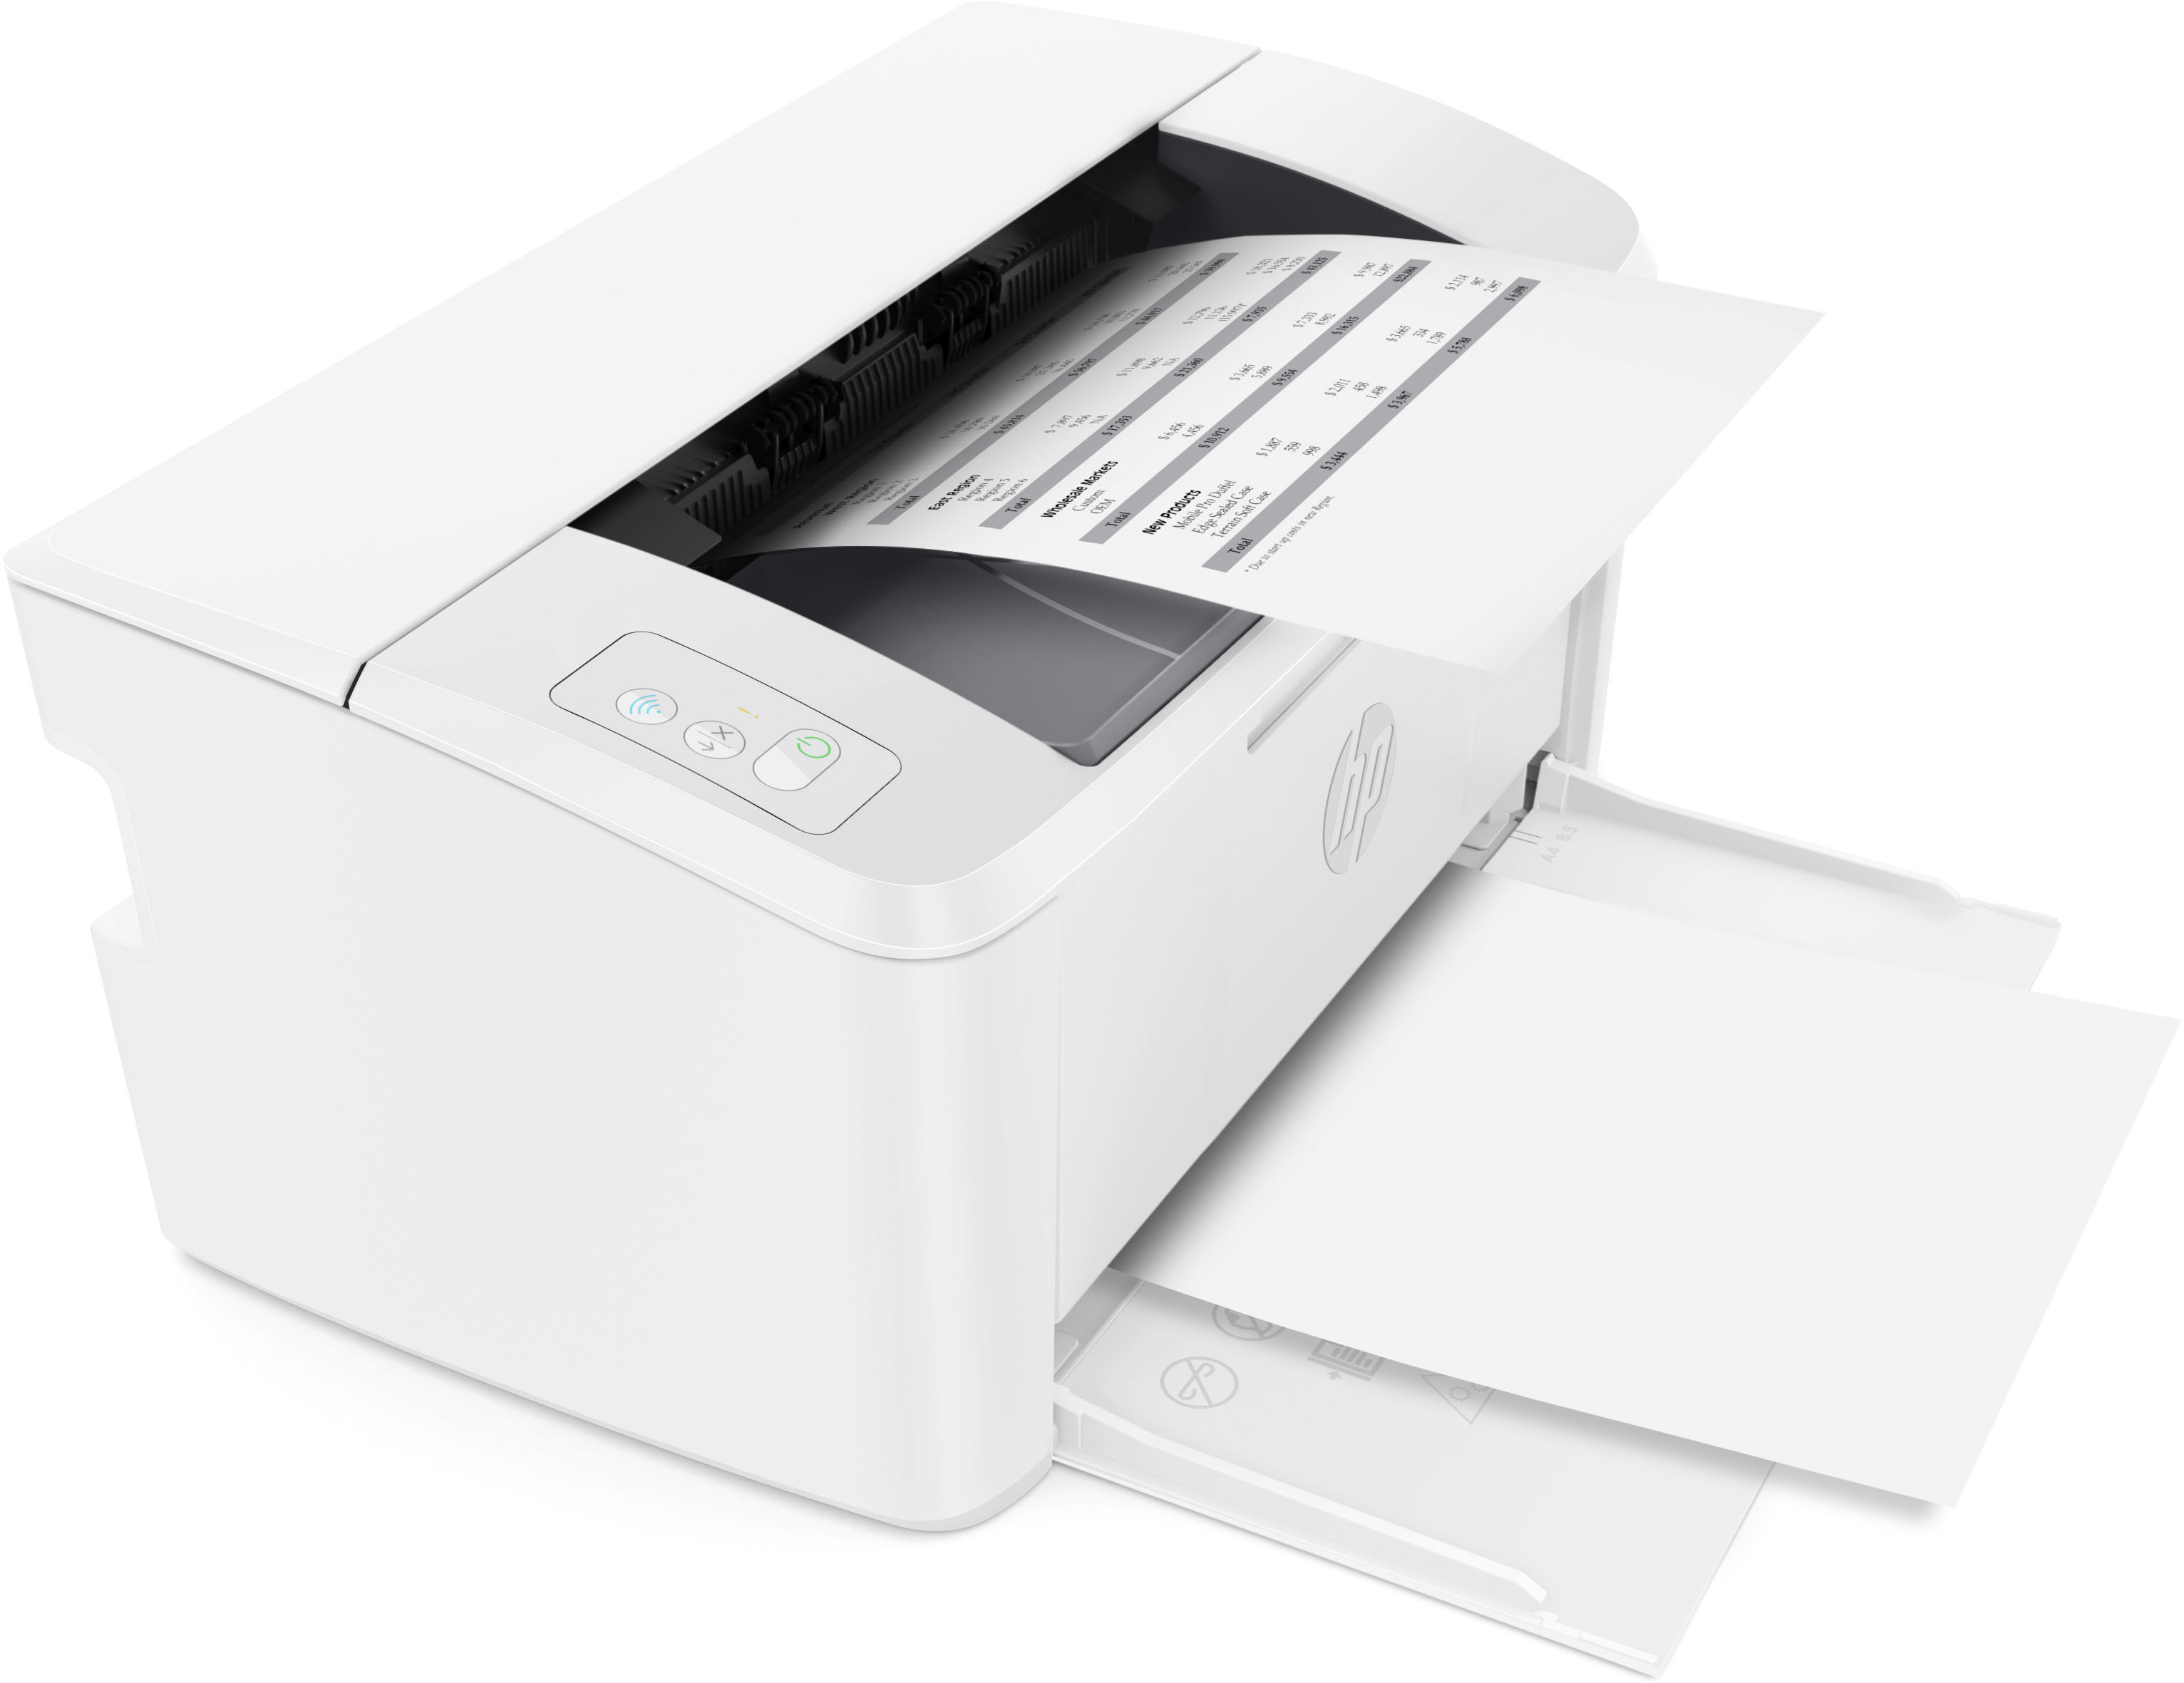 HP LaserJet M110we Wireless Best White Buy 6 Black Laser HP+ with - LaserJet months with White of Printer Ink Instant M110we included and